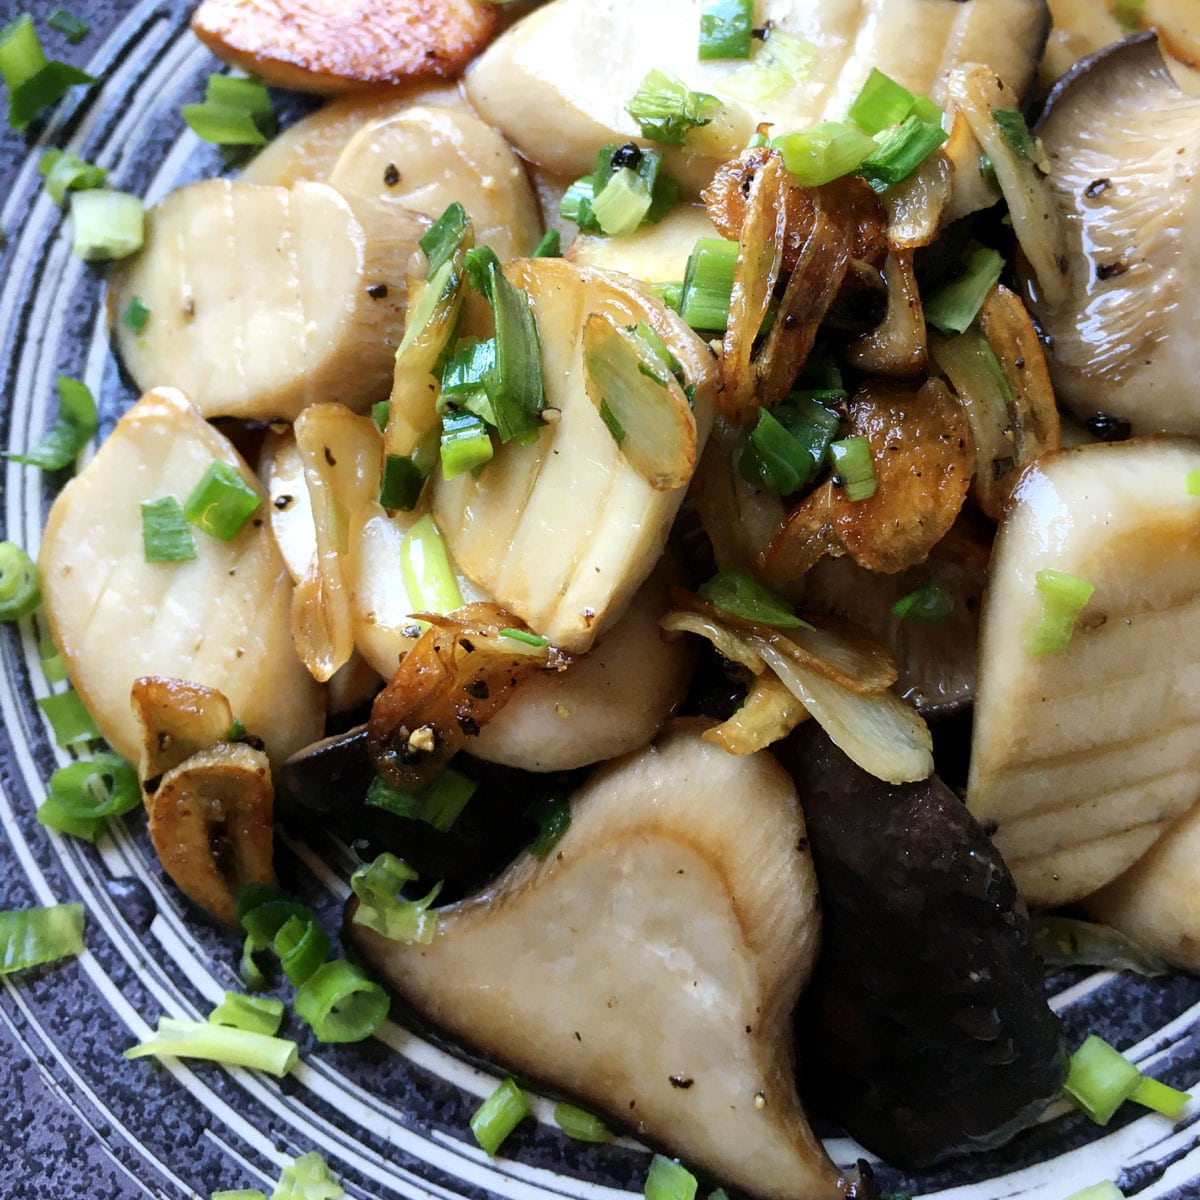 A round dark grey bowl containing cooked mushroom slices, fried garlic slices, and chopped green onions.